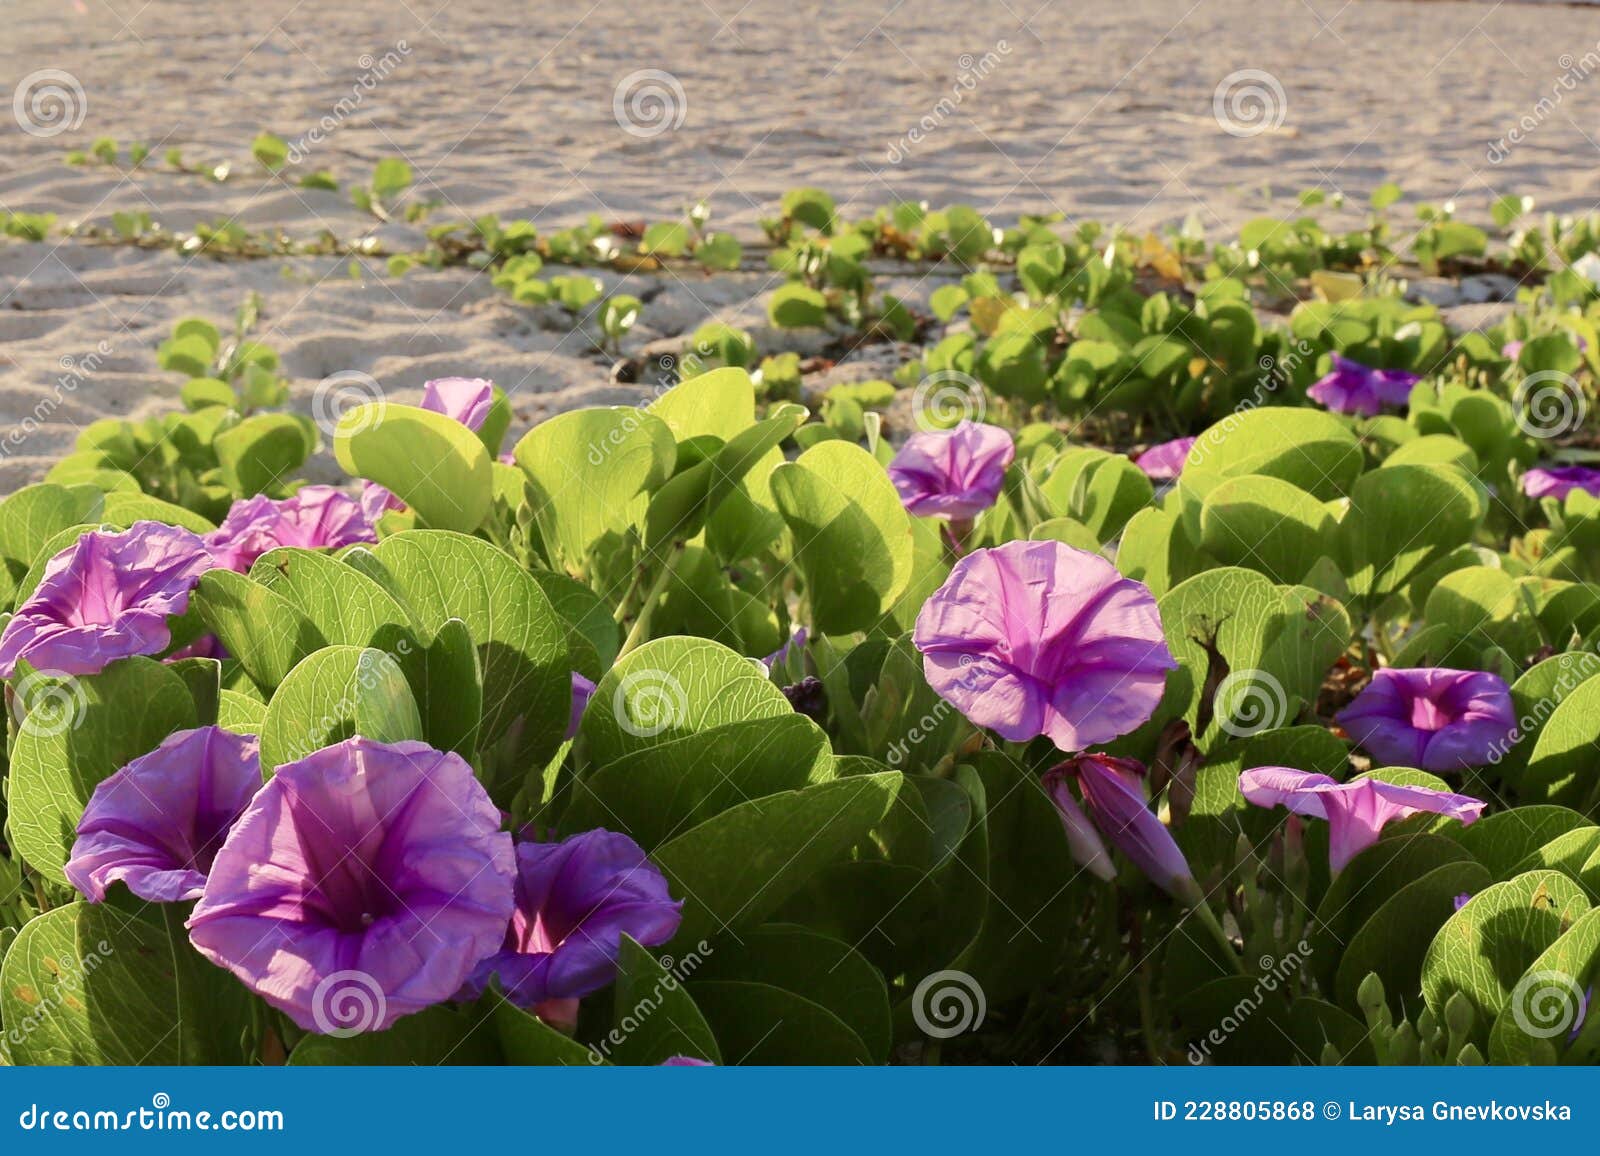 Leaves Palm Trees and Violet Flower As a Background Stock Photo - Image ...